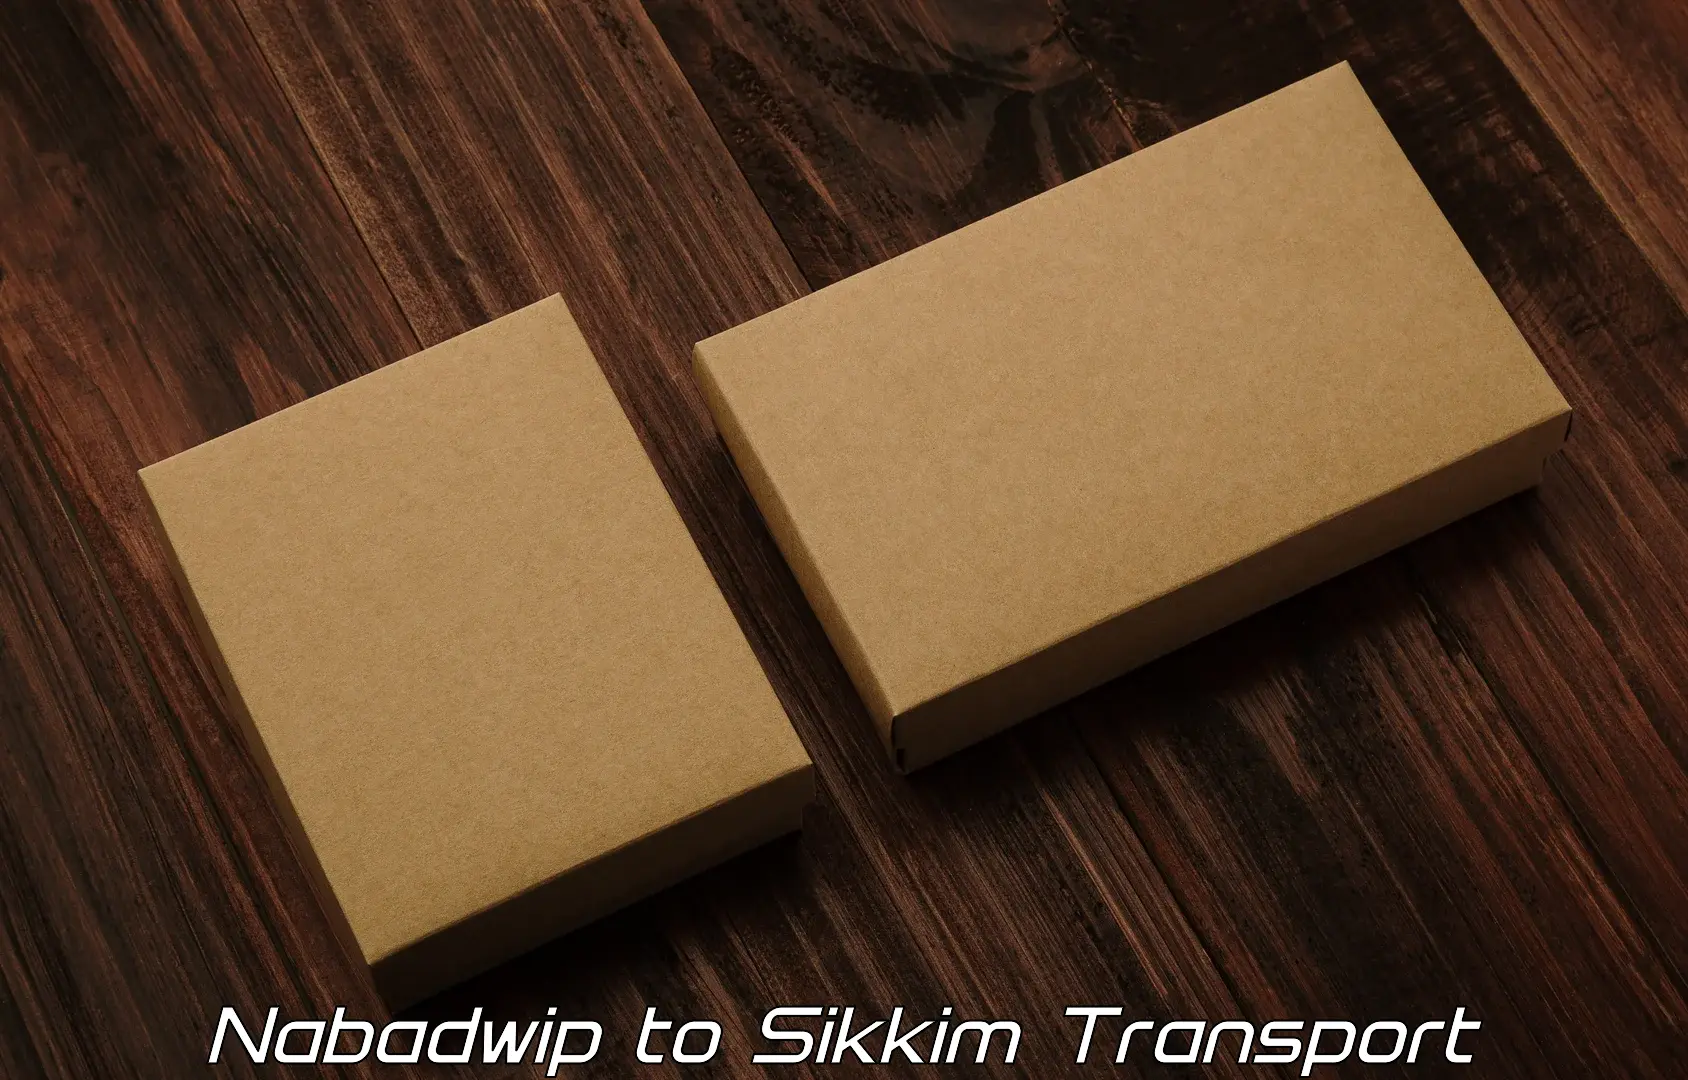 Container transport service Nabadwip to Sikkim